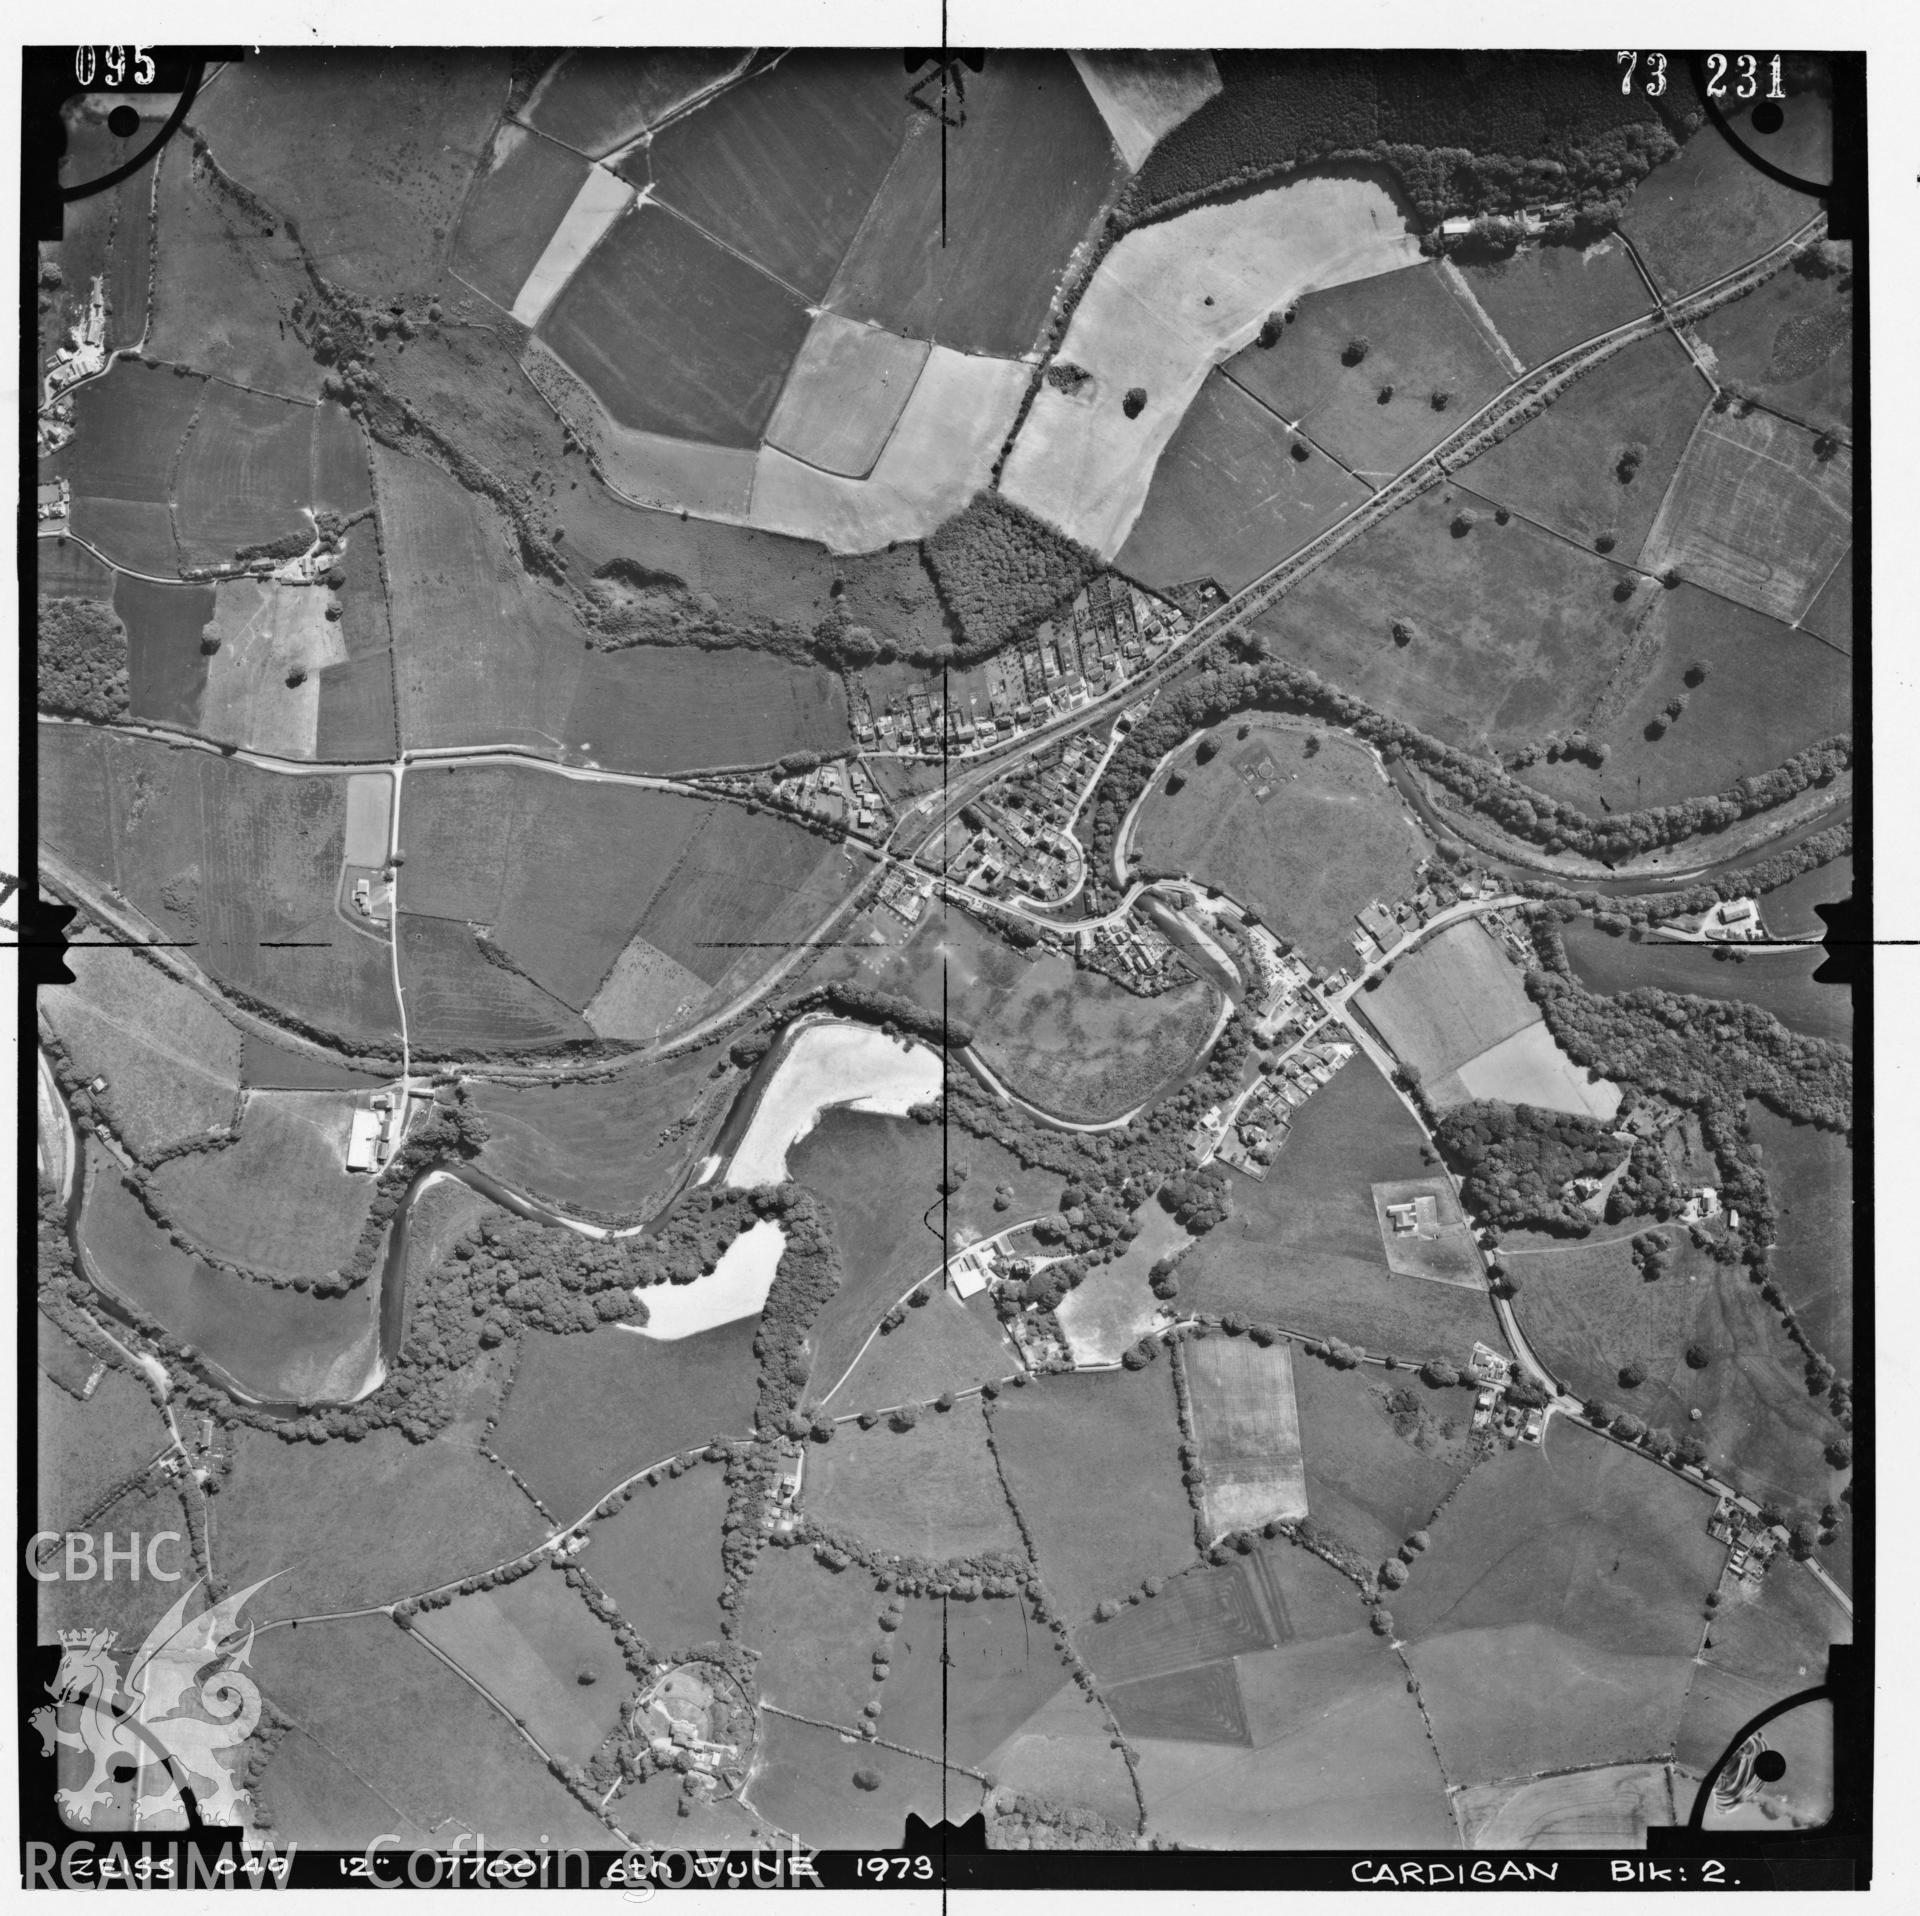 Digitized copy of an aerial photograph showing the village of Llanfarian and surrounding area, taken by Ordnance Survey, 1973.